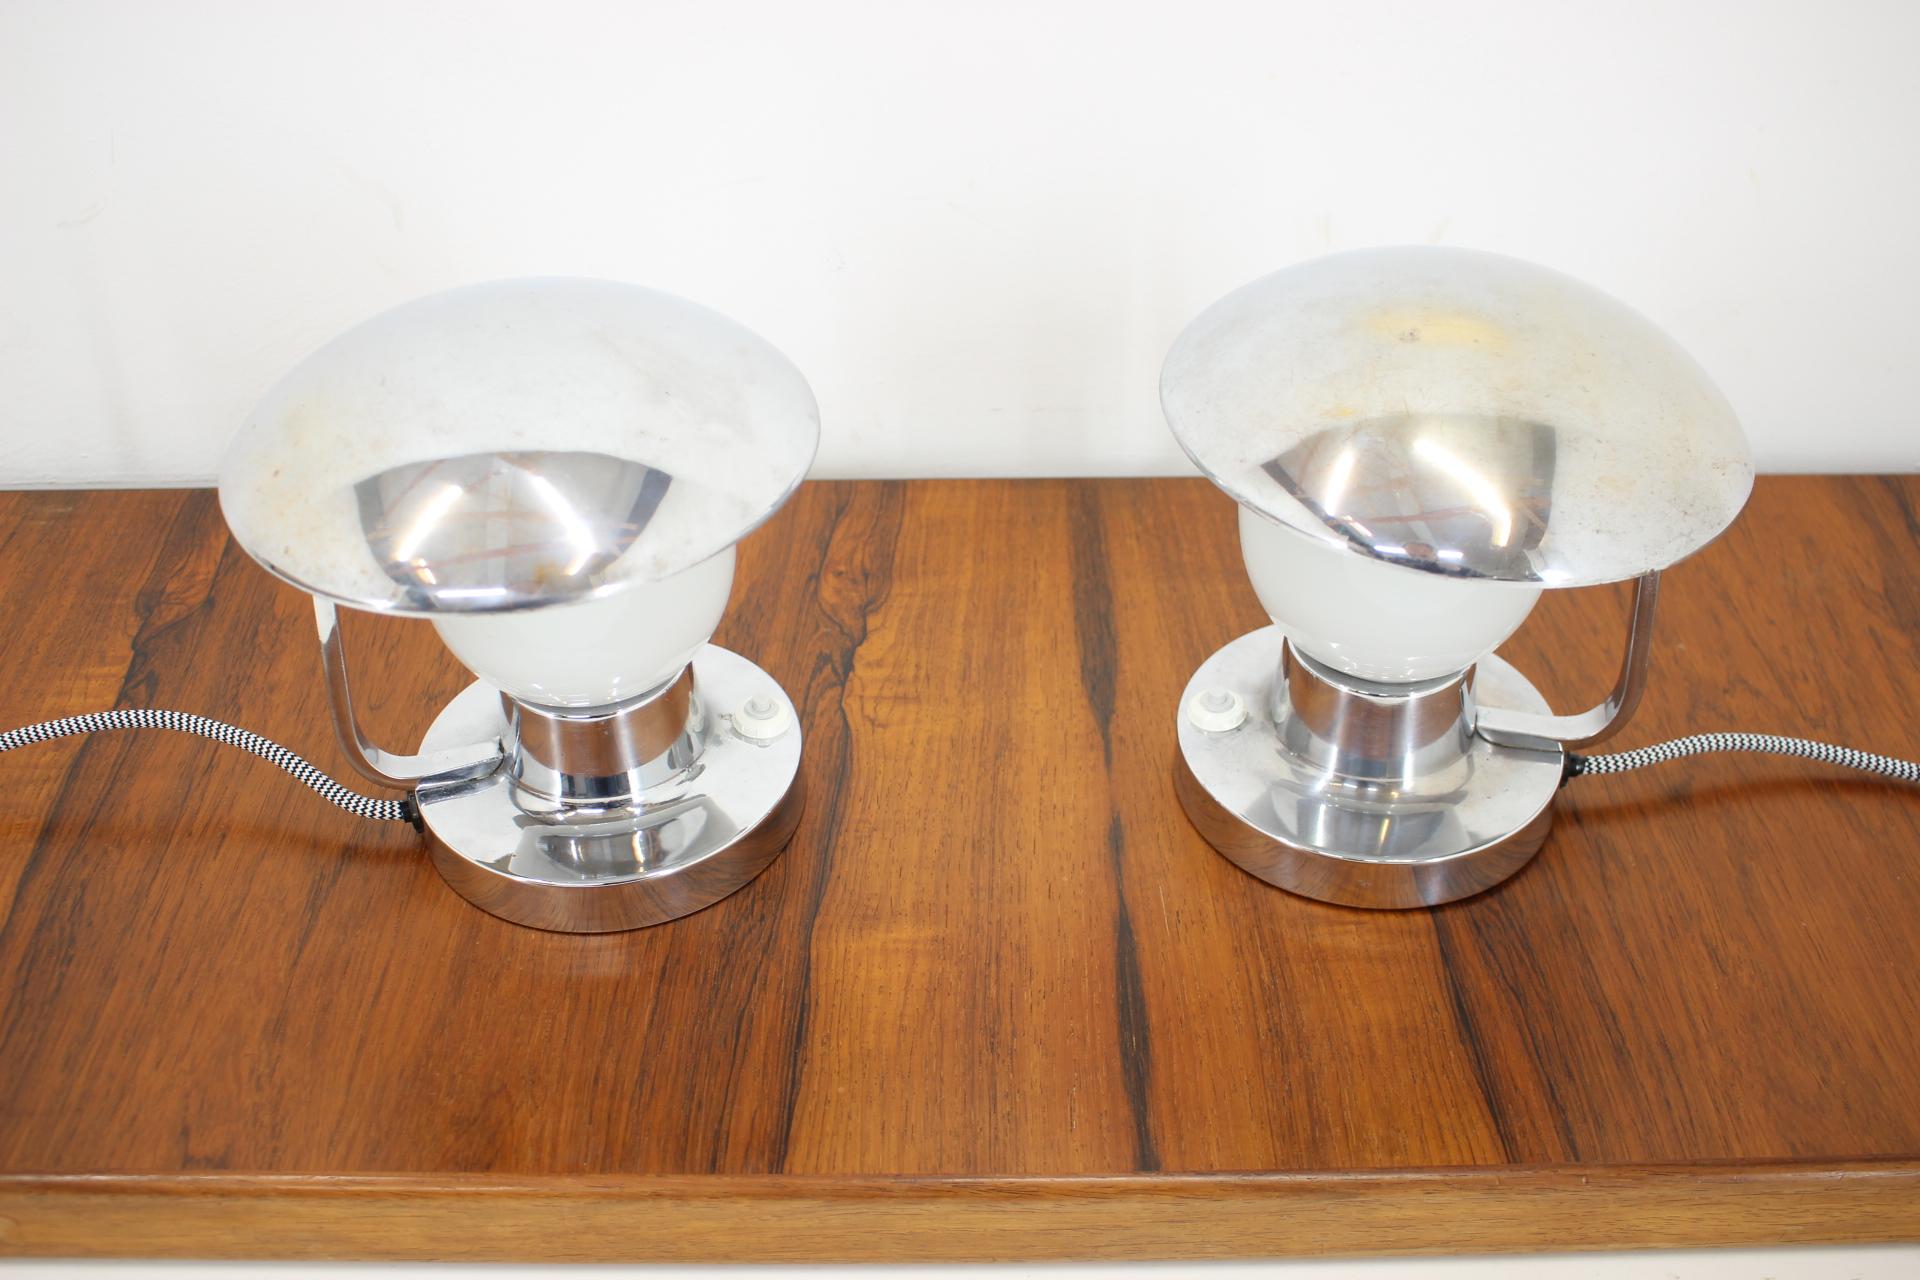 Rare Bauhaus table lamps by Napako, type 1195
Made in Czechoslovakia in 1950
Very good condition, new wiring.